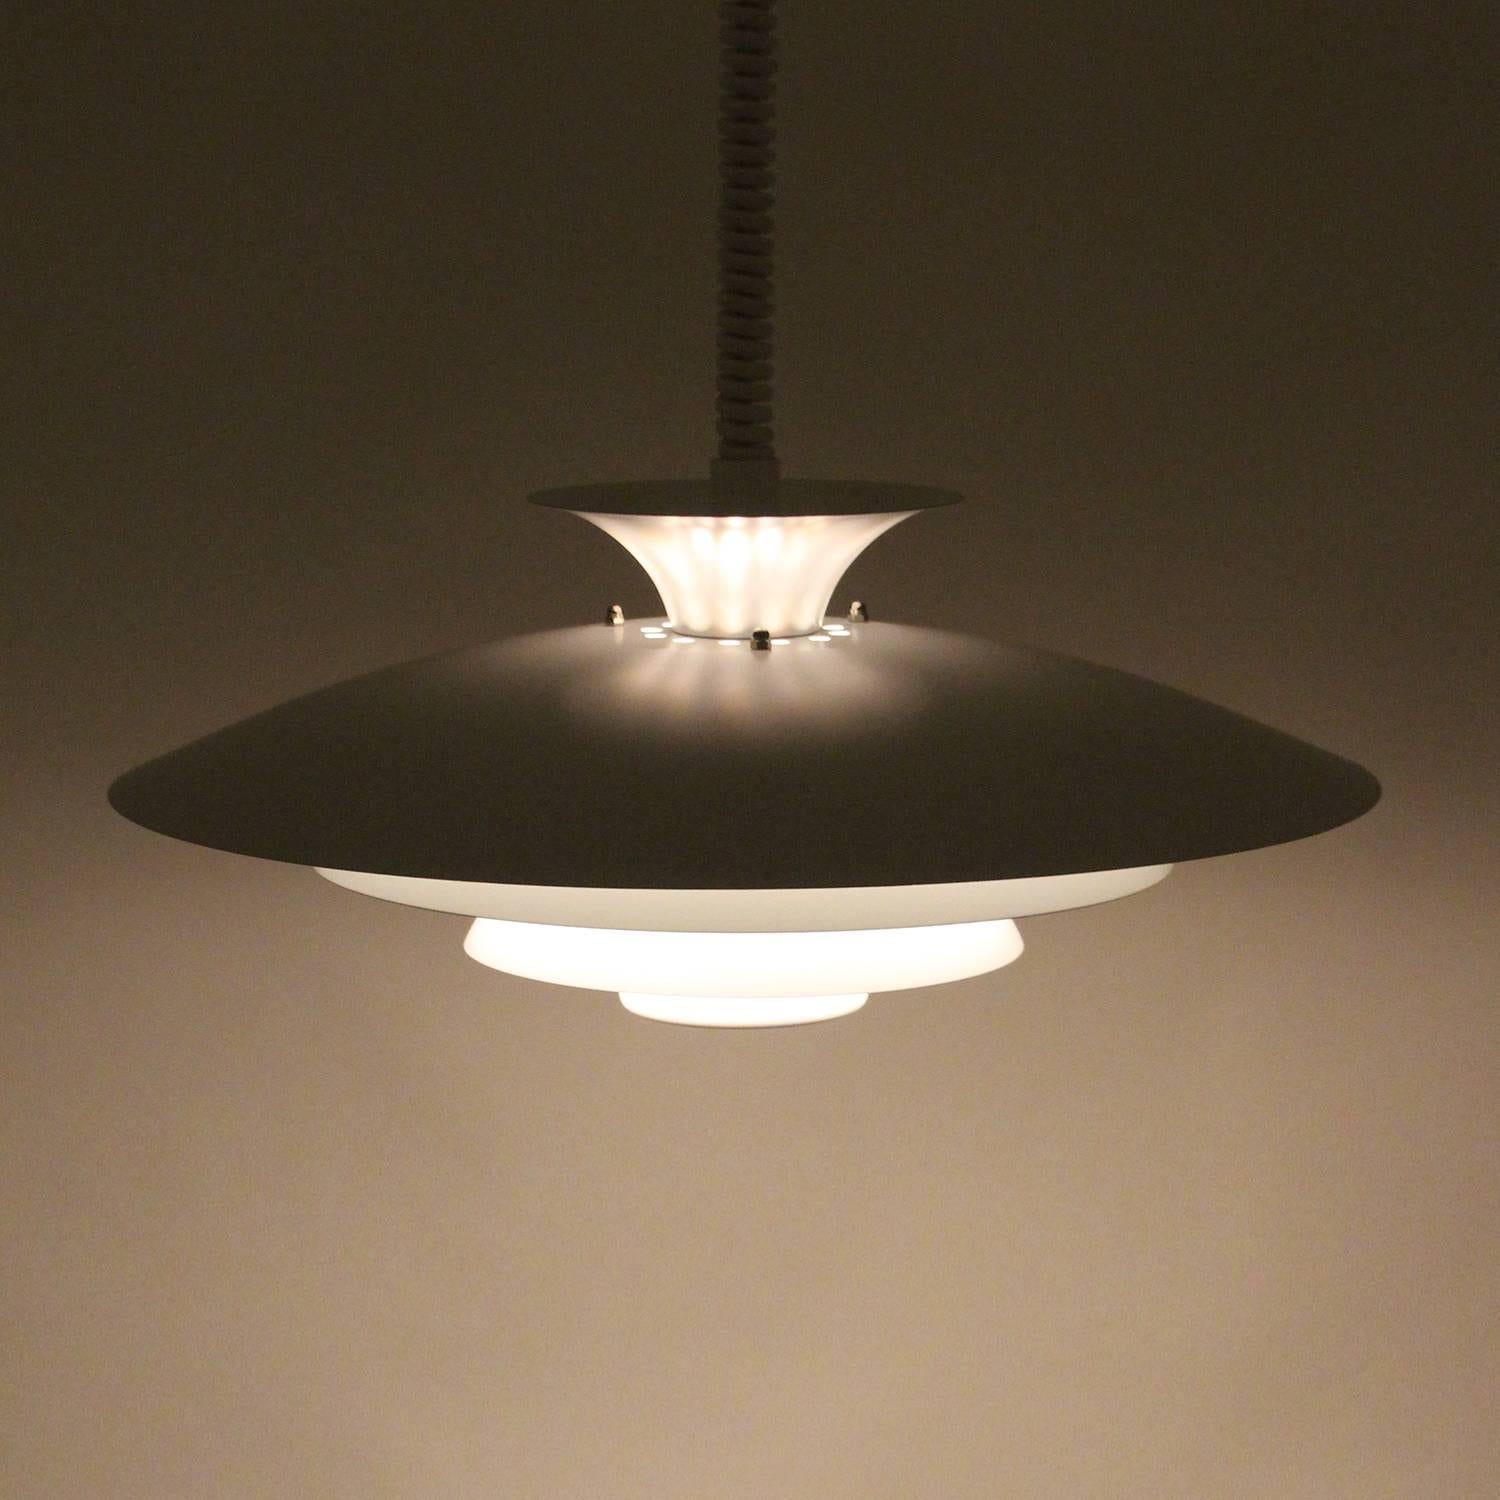 Late 20th Century No. 52511, White Pendant Light by Form-Light, 1970s, Large White Ceiling Light